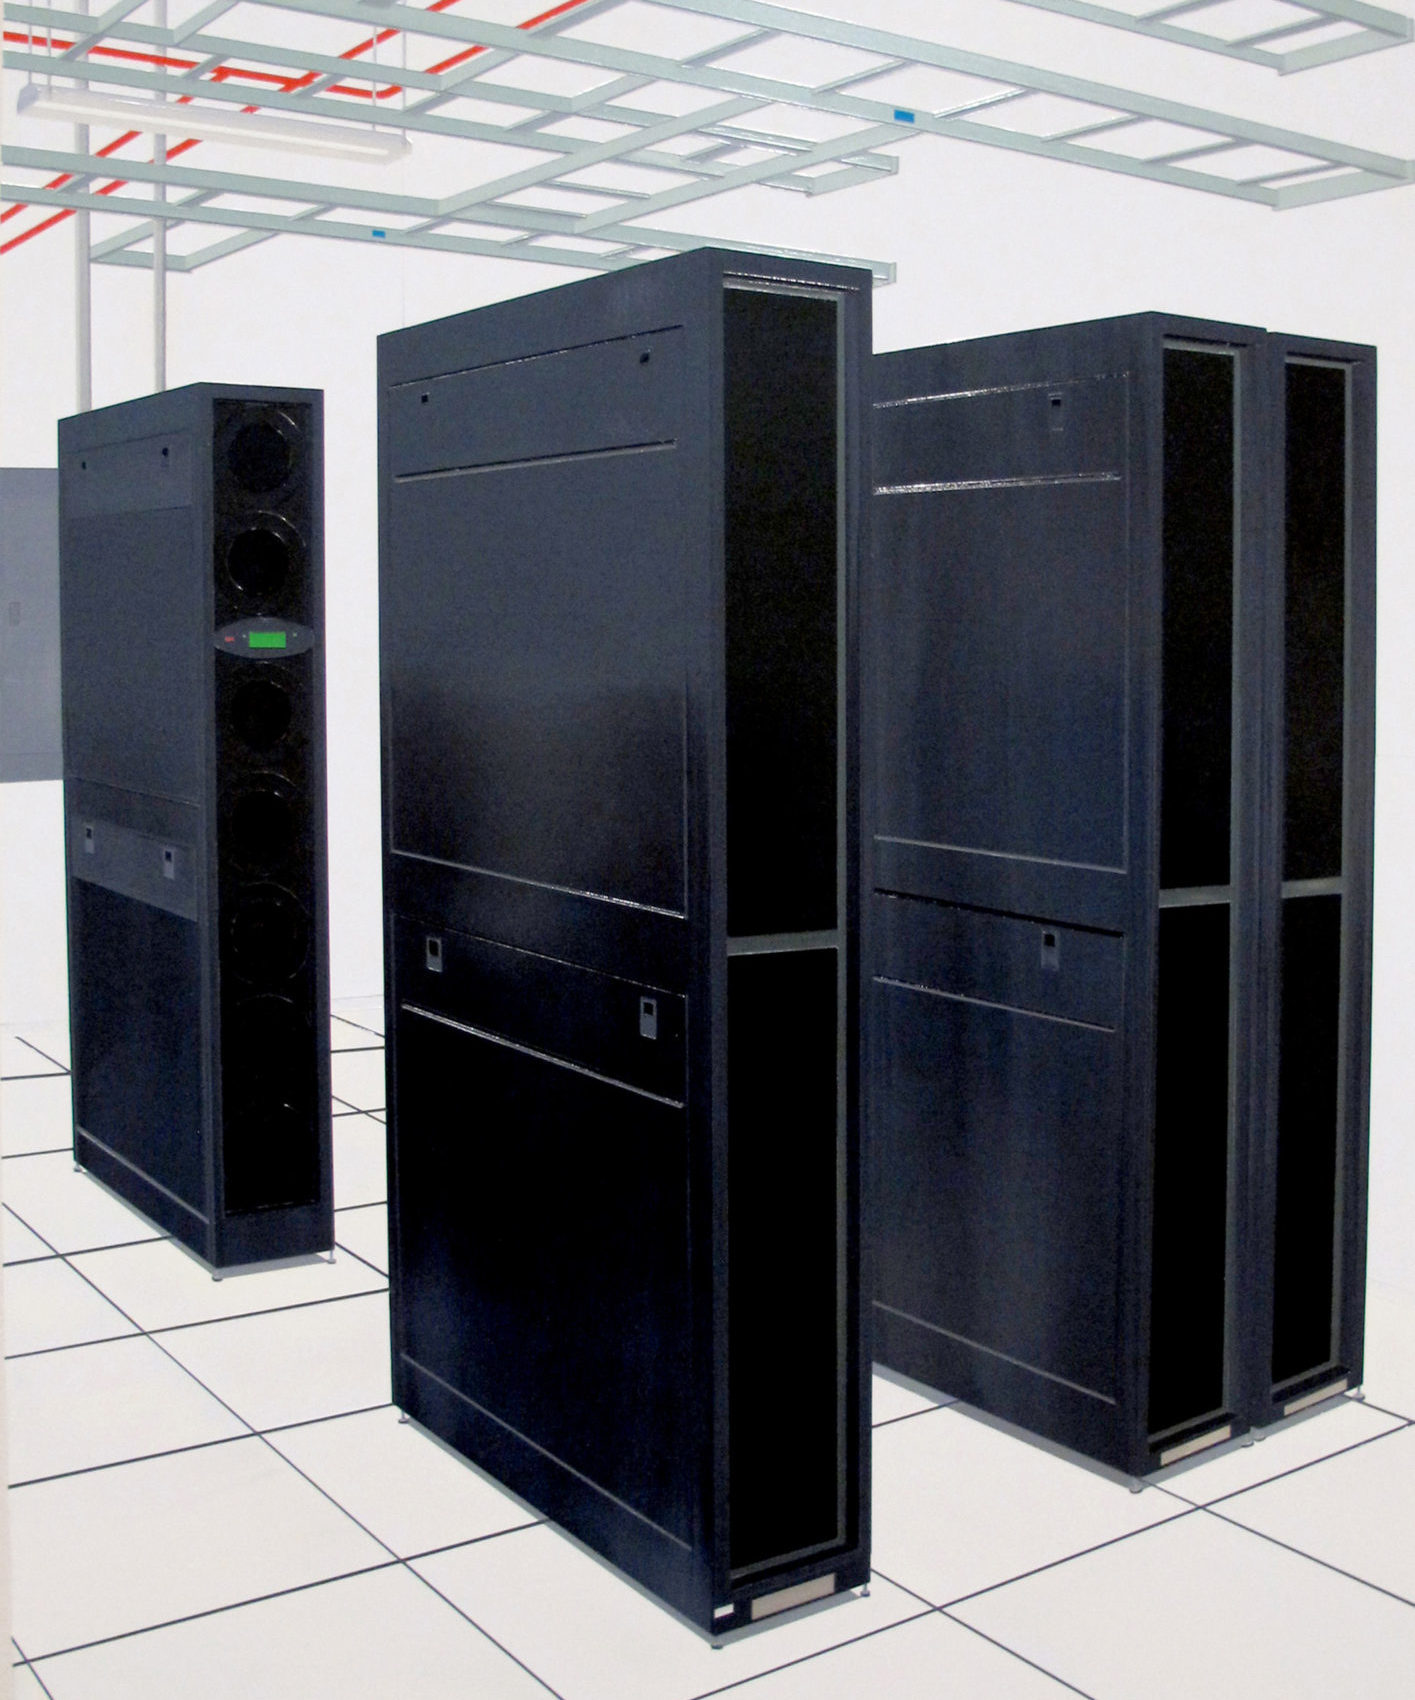 Depiction of large black servers (rectangular machines) in a white room with modernist design.